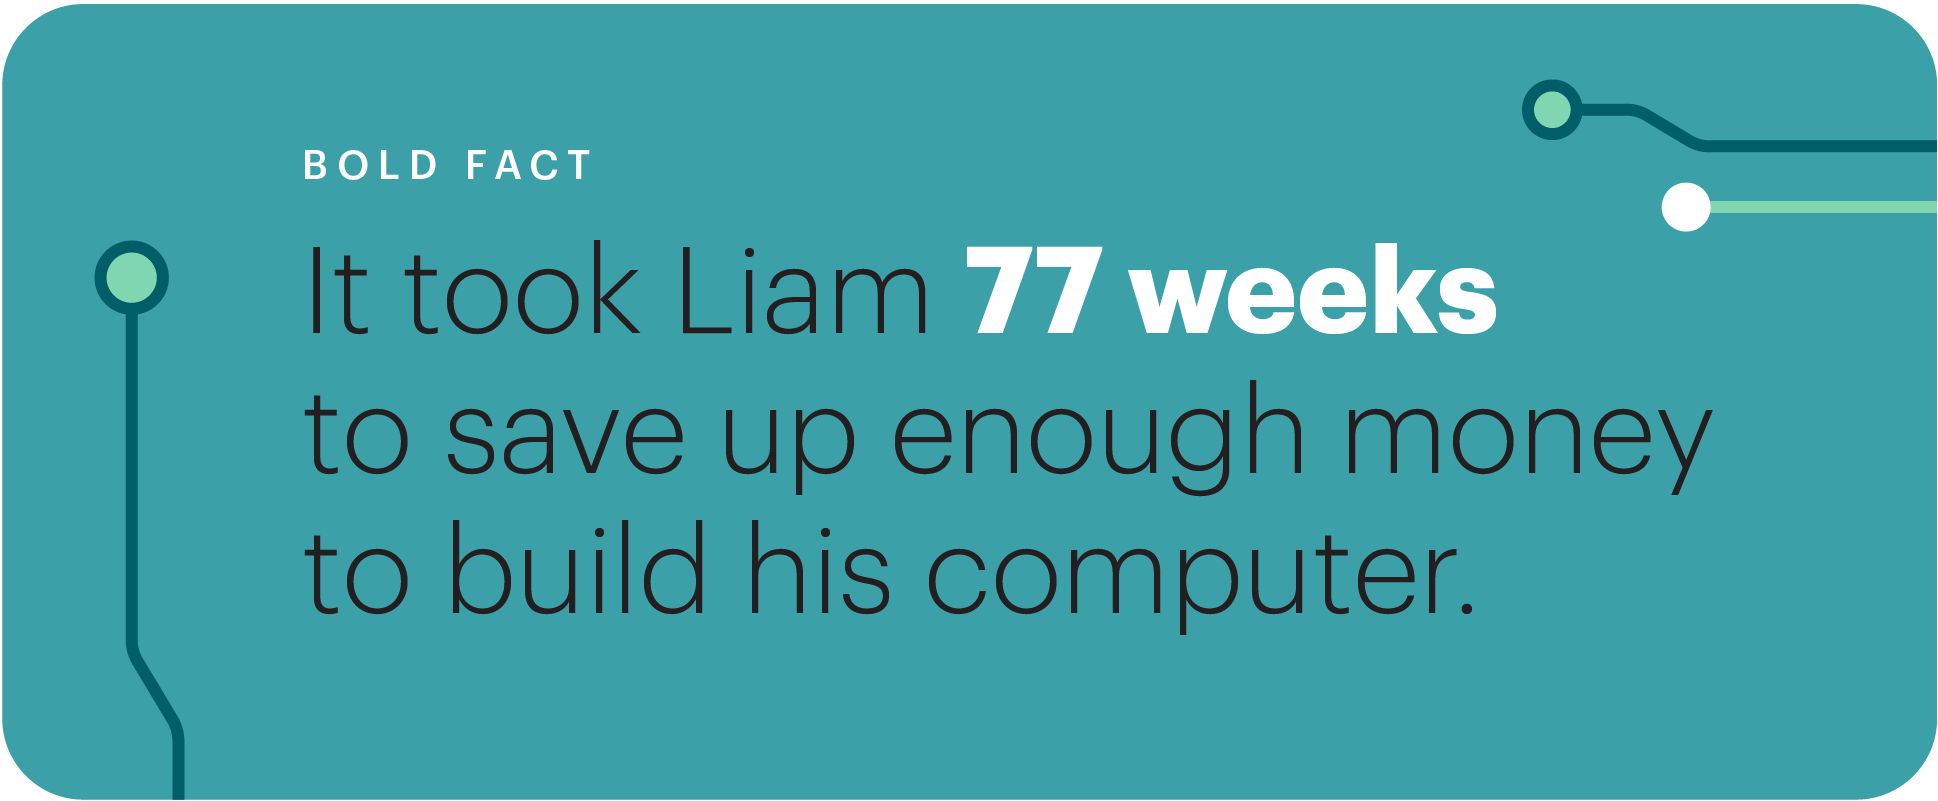 bold fact, Liam saving up for 77 weeks